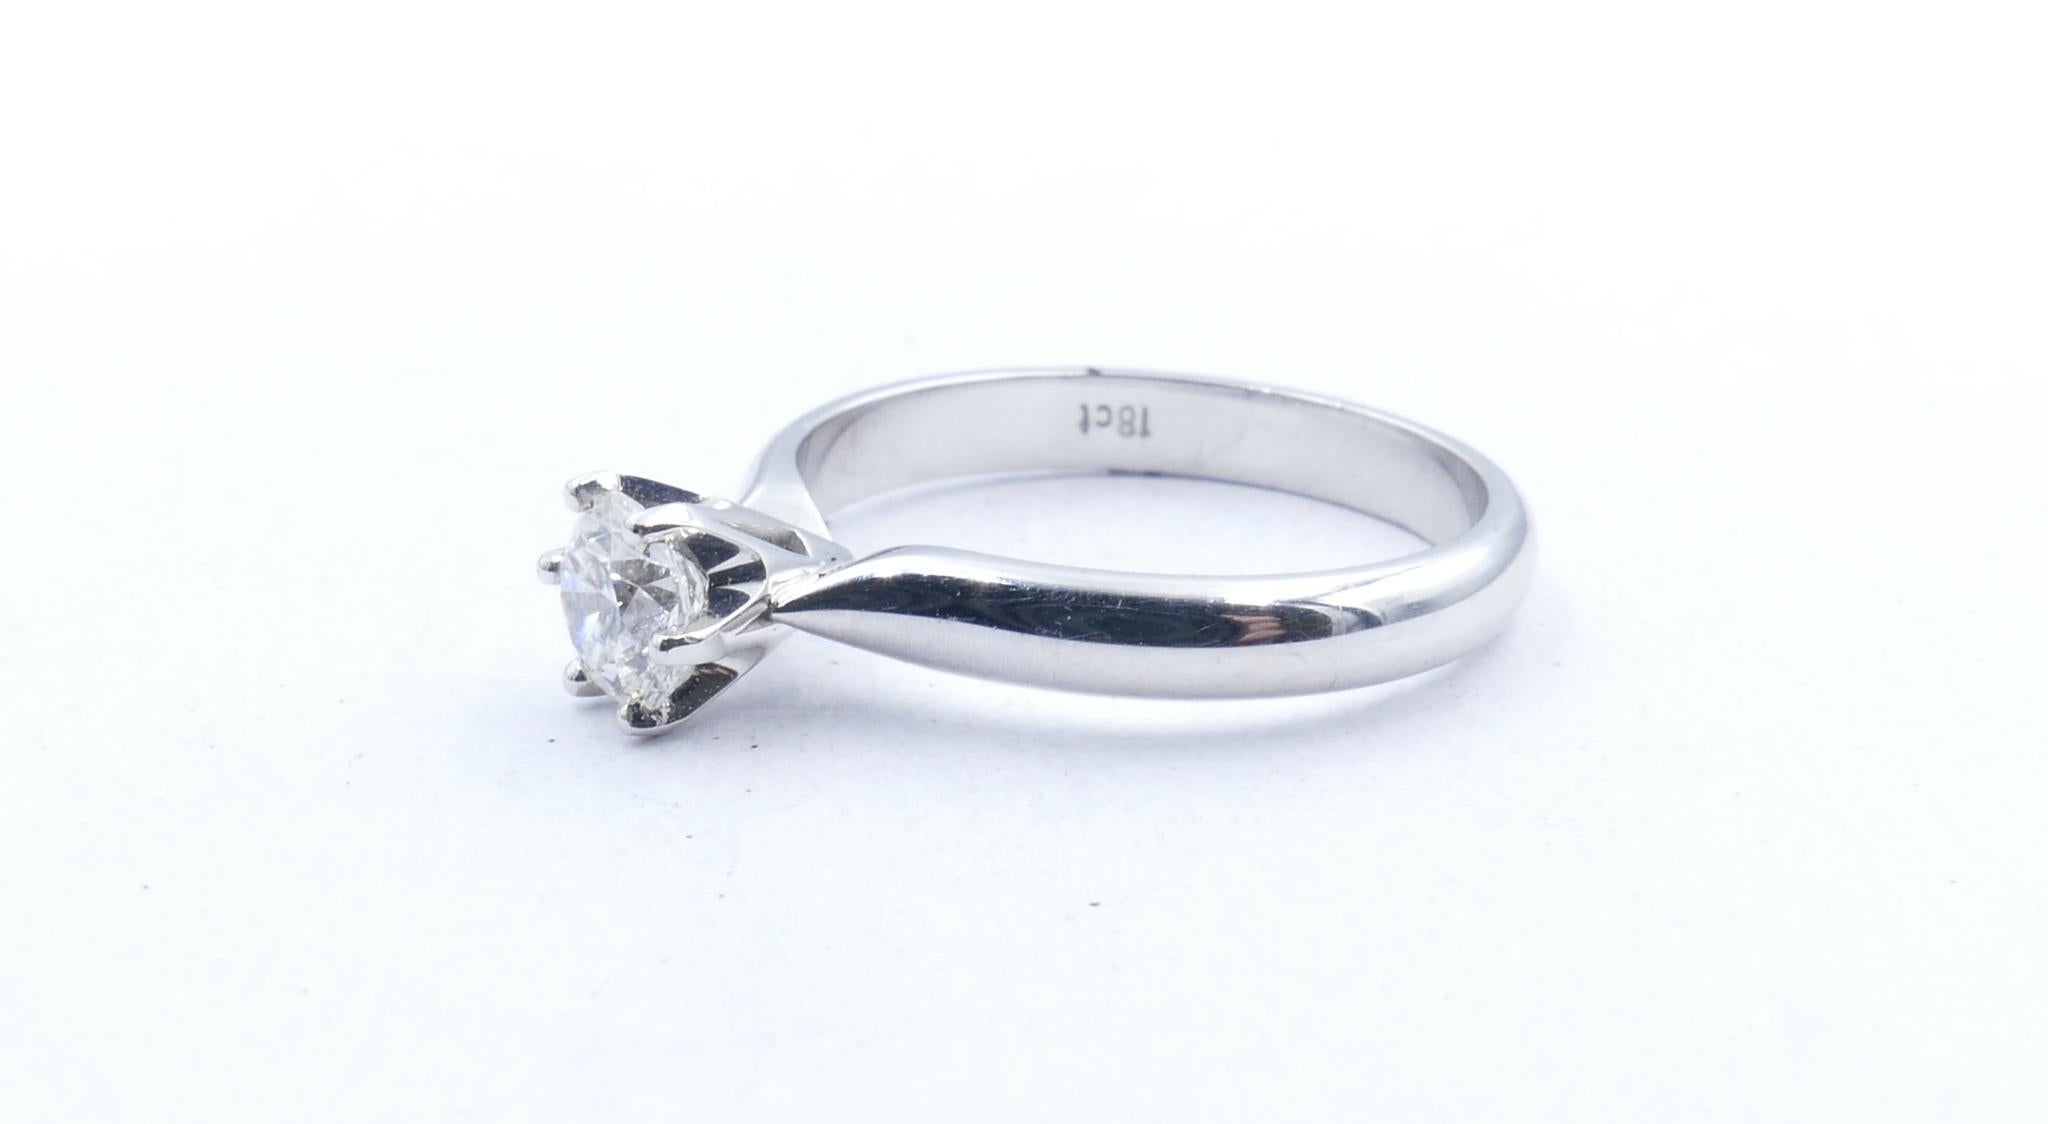 The Colour of this classically elegant Ring, F, is the real standout.
Beautifully crafted in 18ct white gold it is SI1 clarity with a GIA Report Number 2165315679 inscribed on the girdle of the stone.
Finger Size is N but could be easily